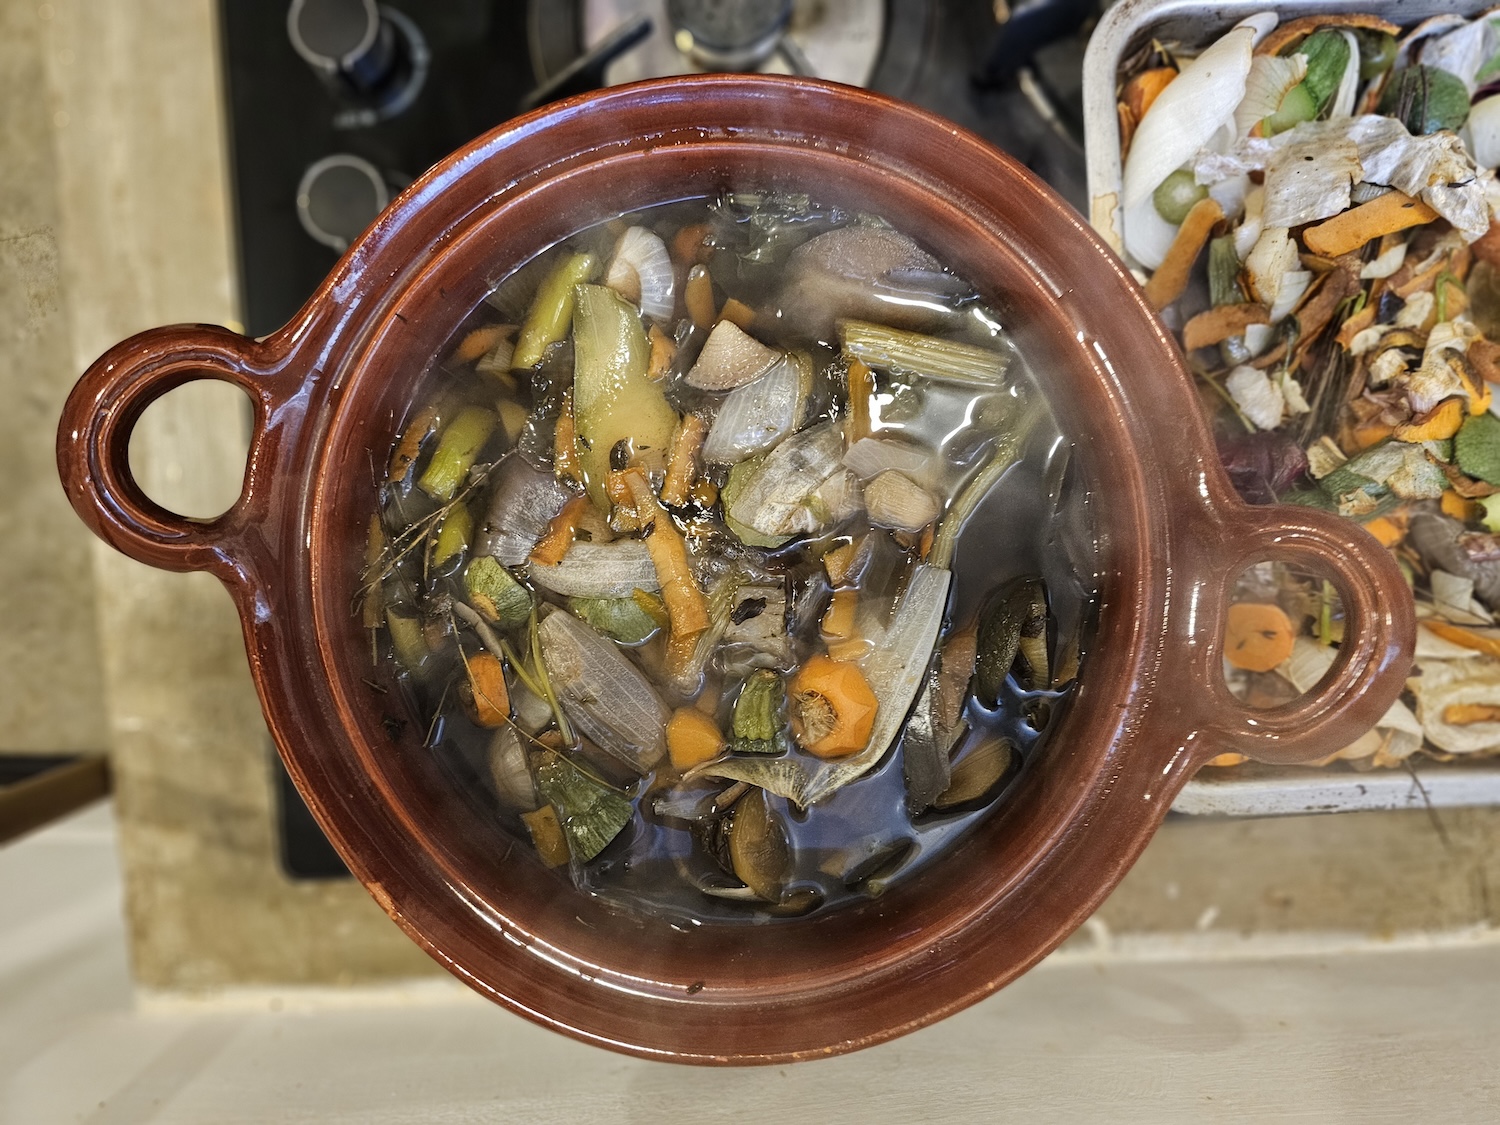 Finished stock - how to make vegetable broth with vegetable scraps